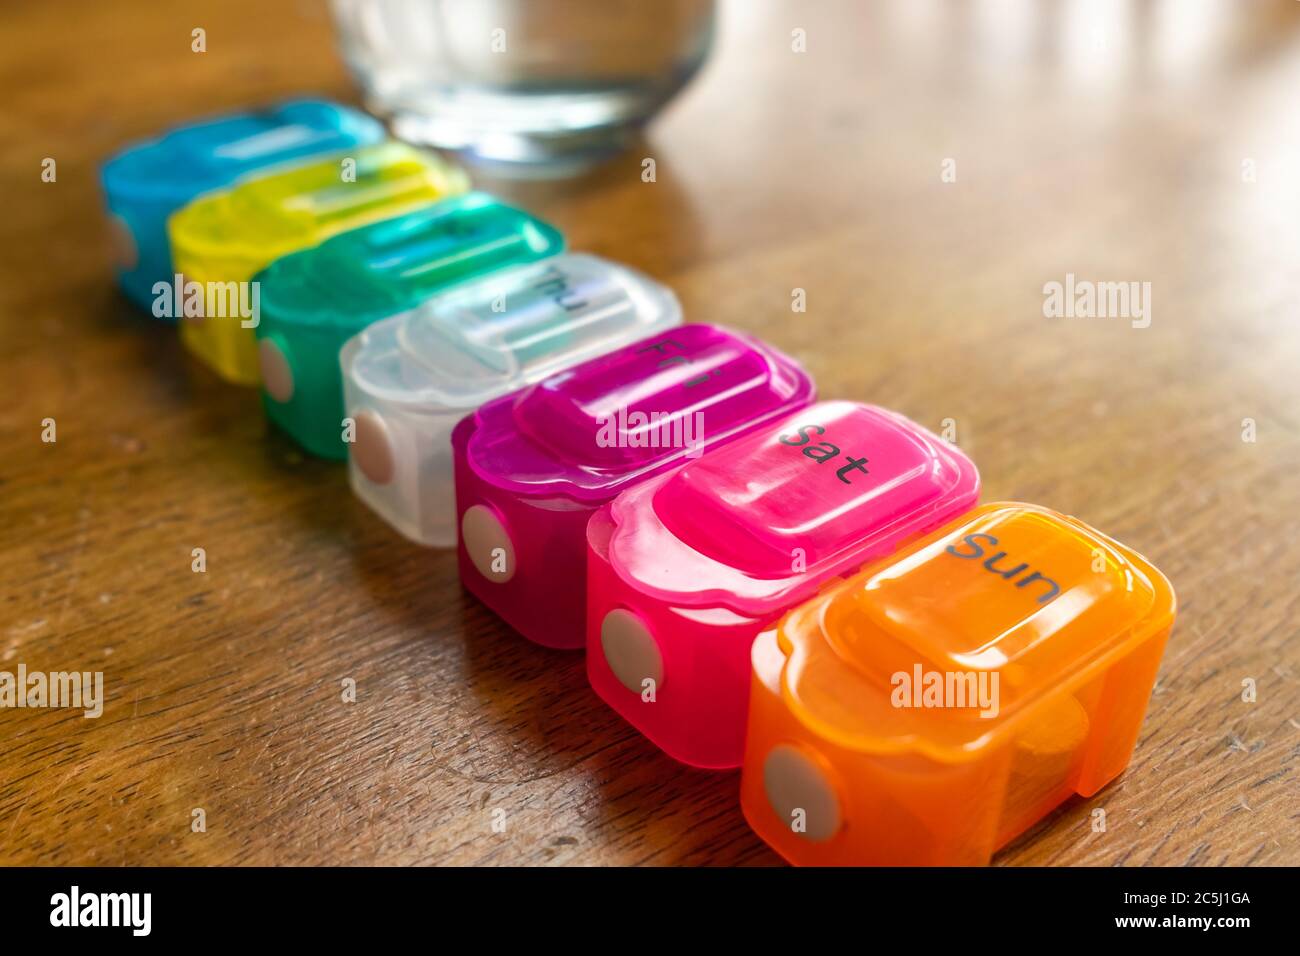 Shallow focus of a plastic pill dispenser seen on stable next to a glass of water. Stock Photo